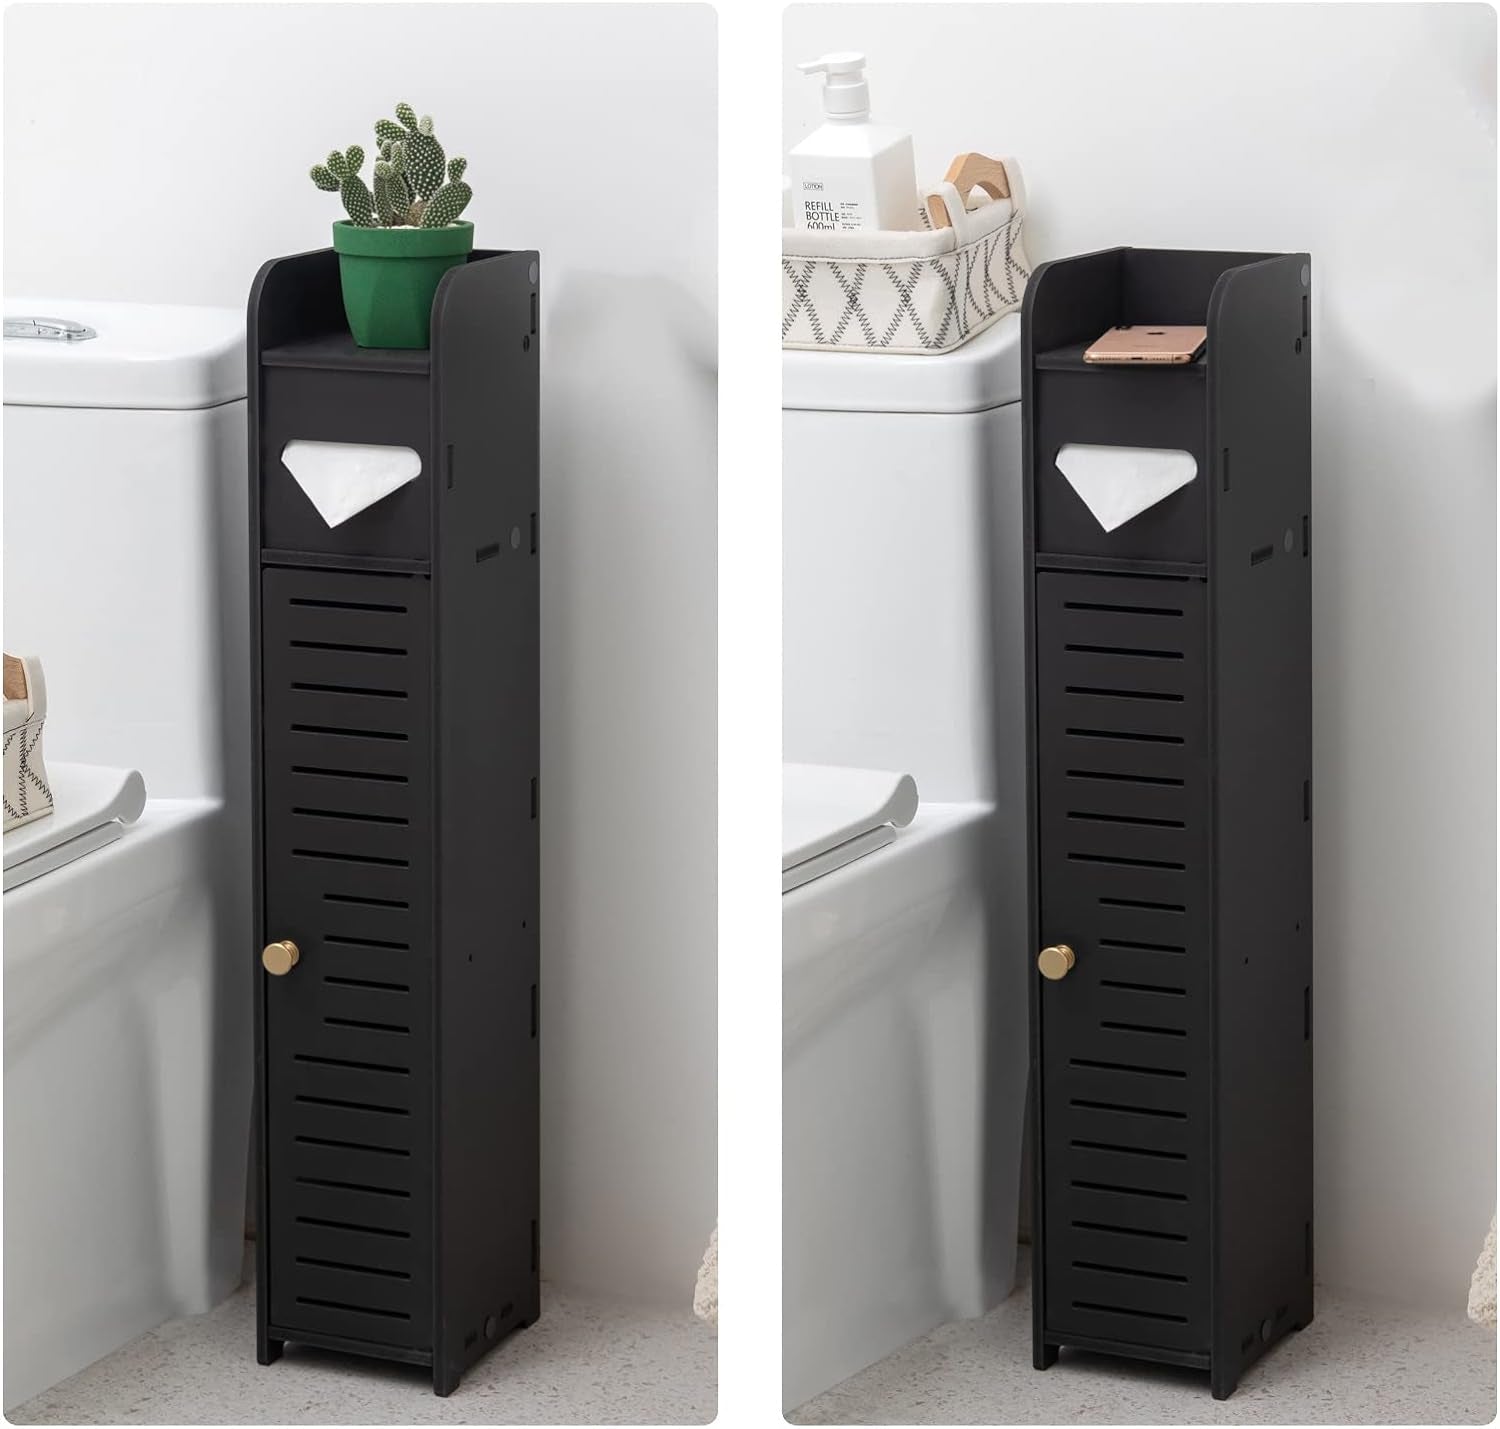 Bathroom Storage, Toilet Paper Stand beside Storage Fit for Half Bathroom, Next to Toilet Storage, for Small Spaces,Black by